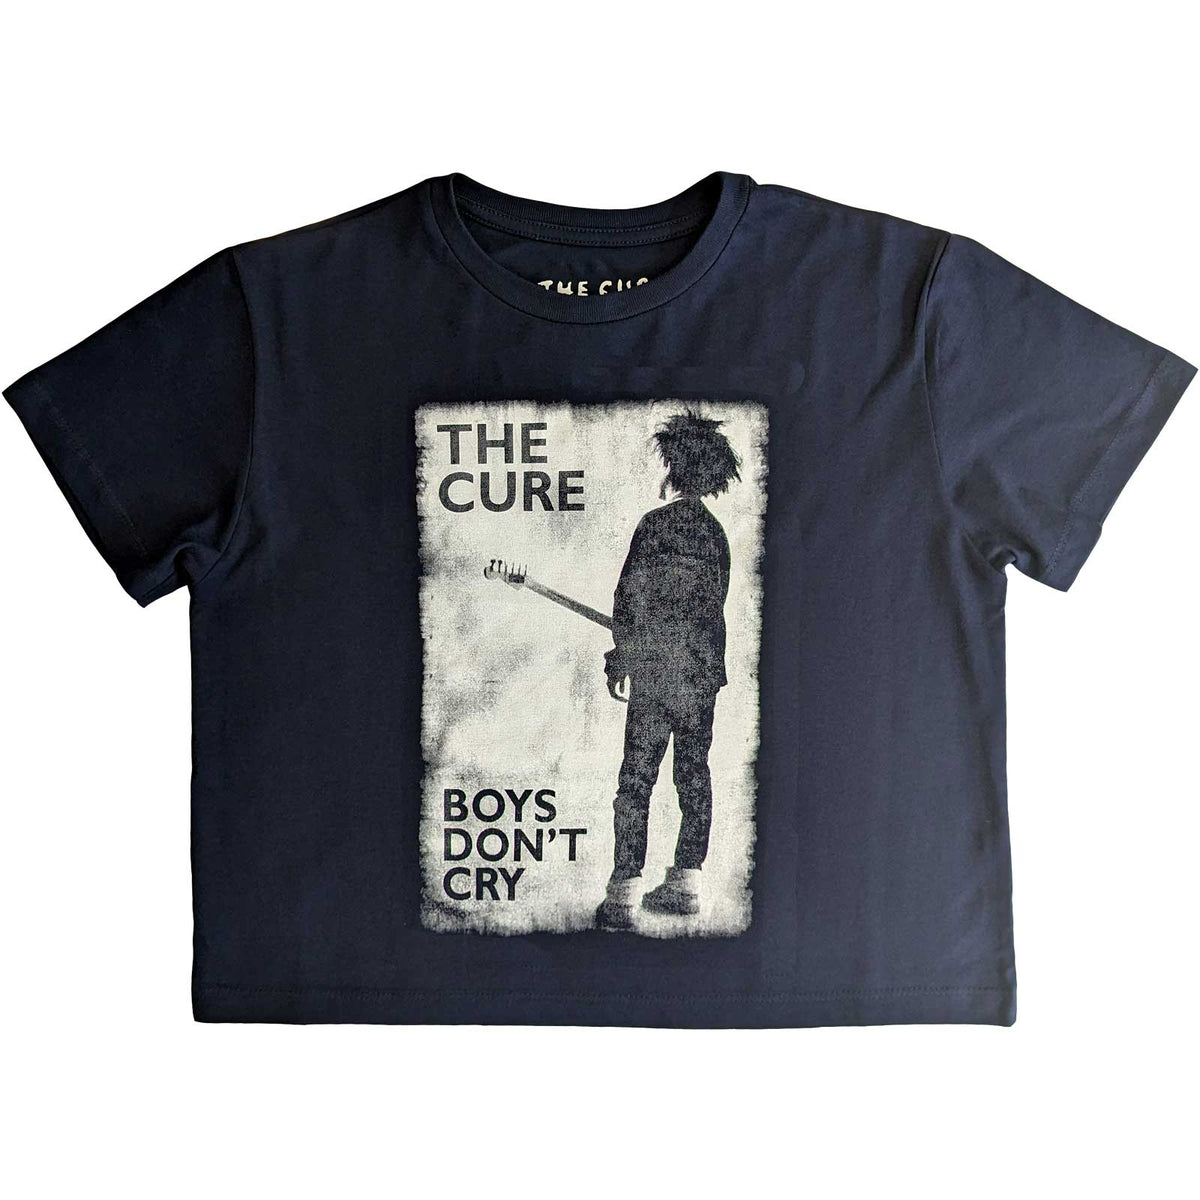 The Cure Ladies Crop Top - Boys Dont Cry Black and White  - Official Licensed Product